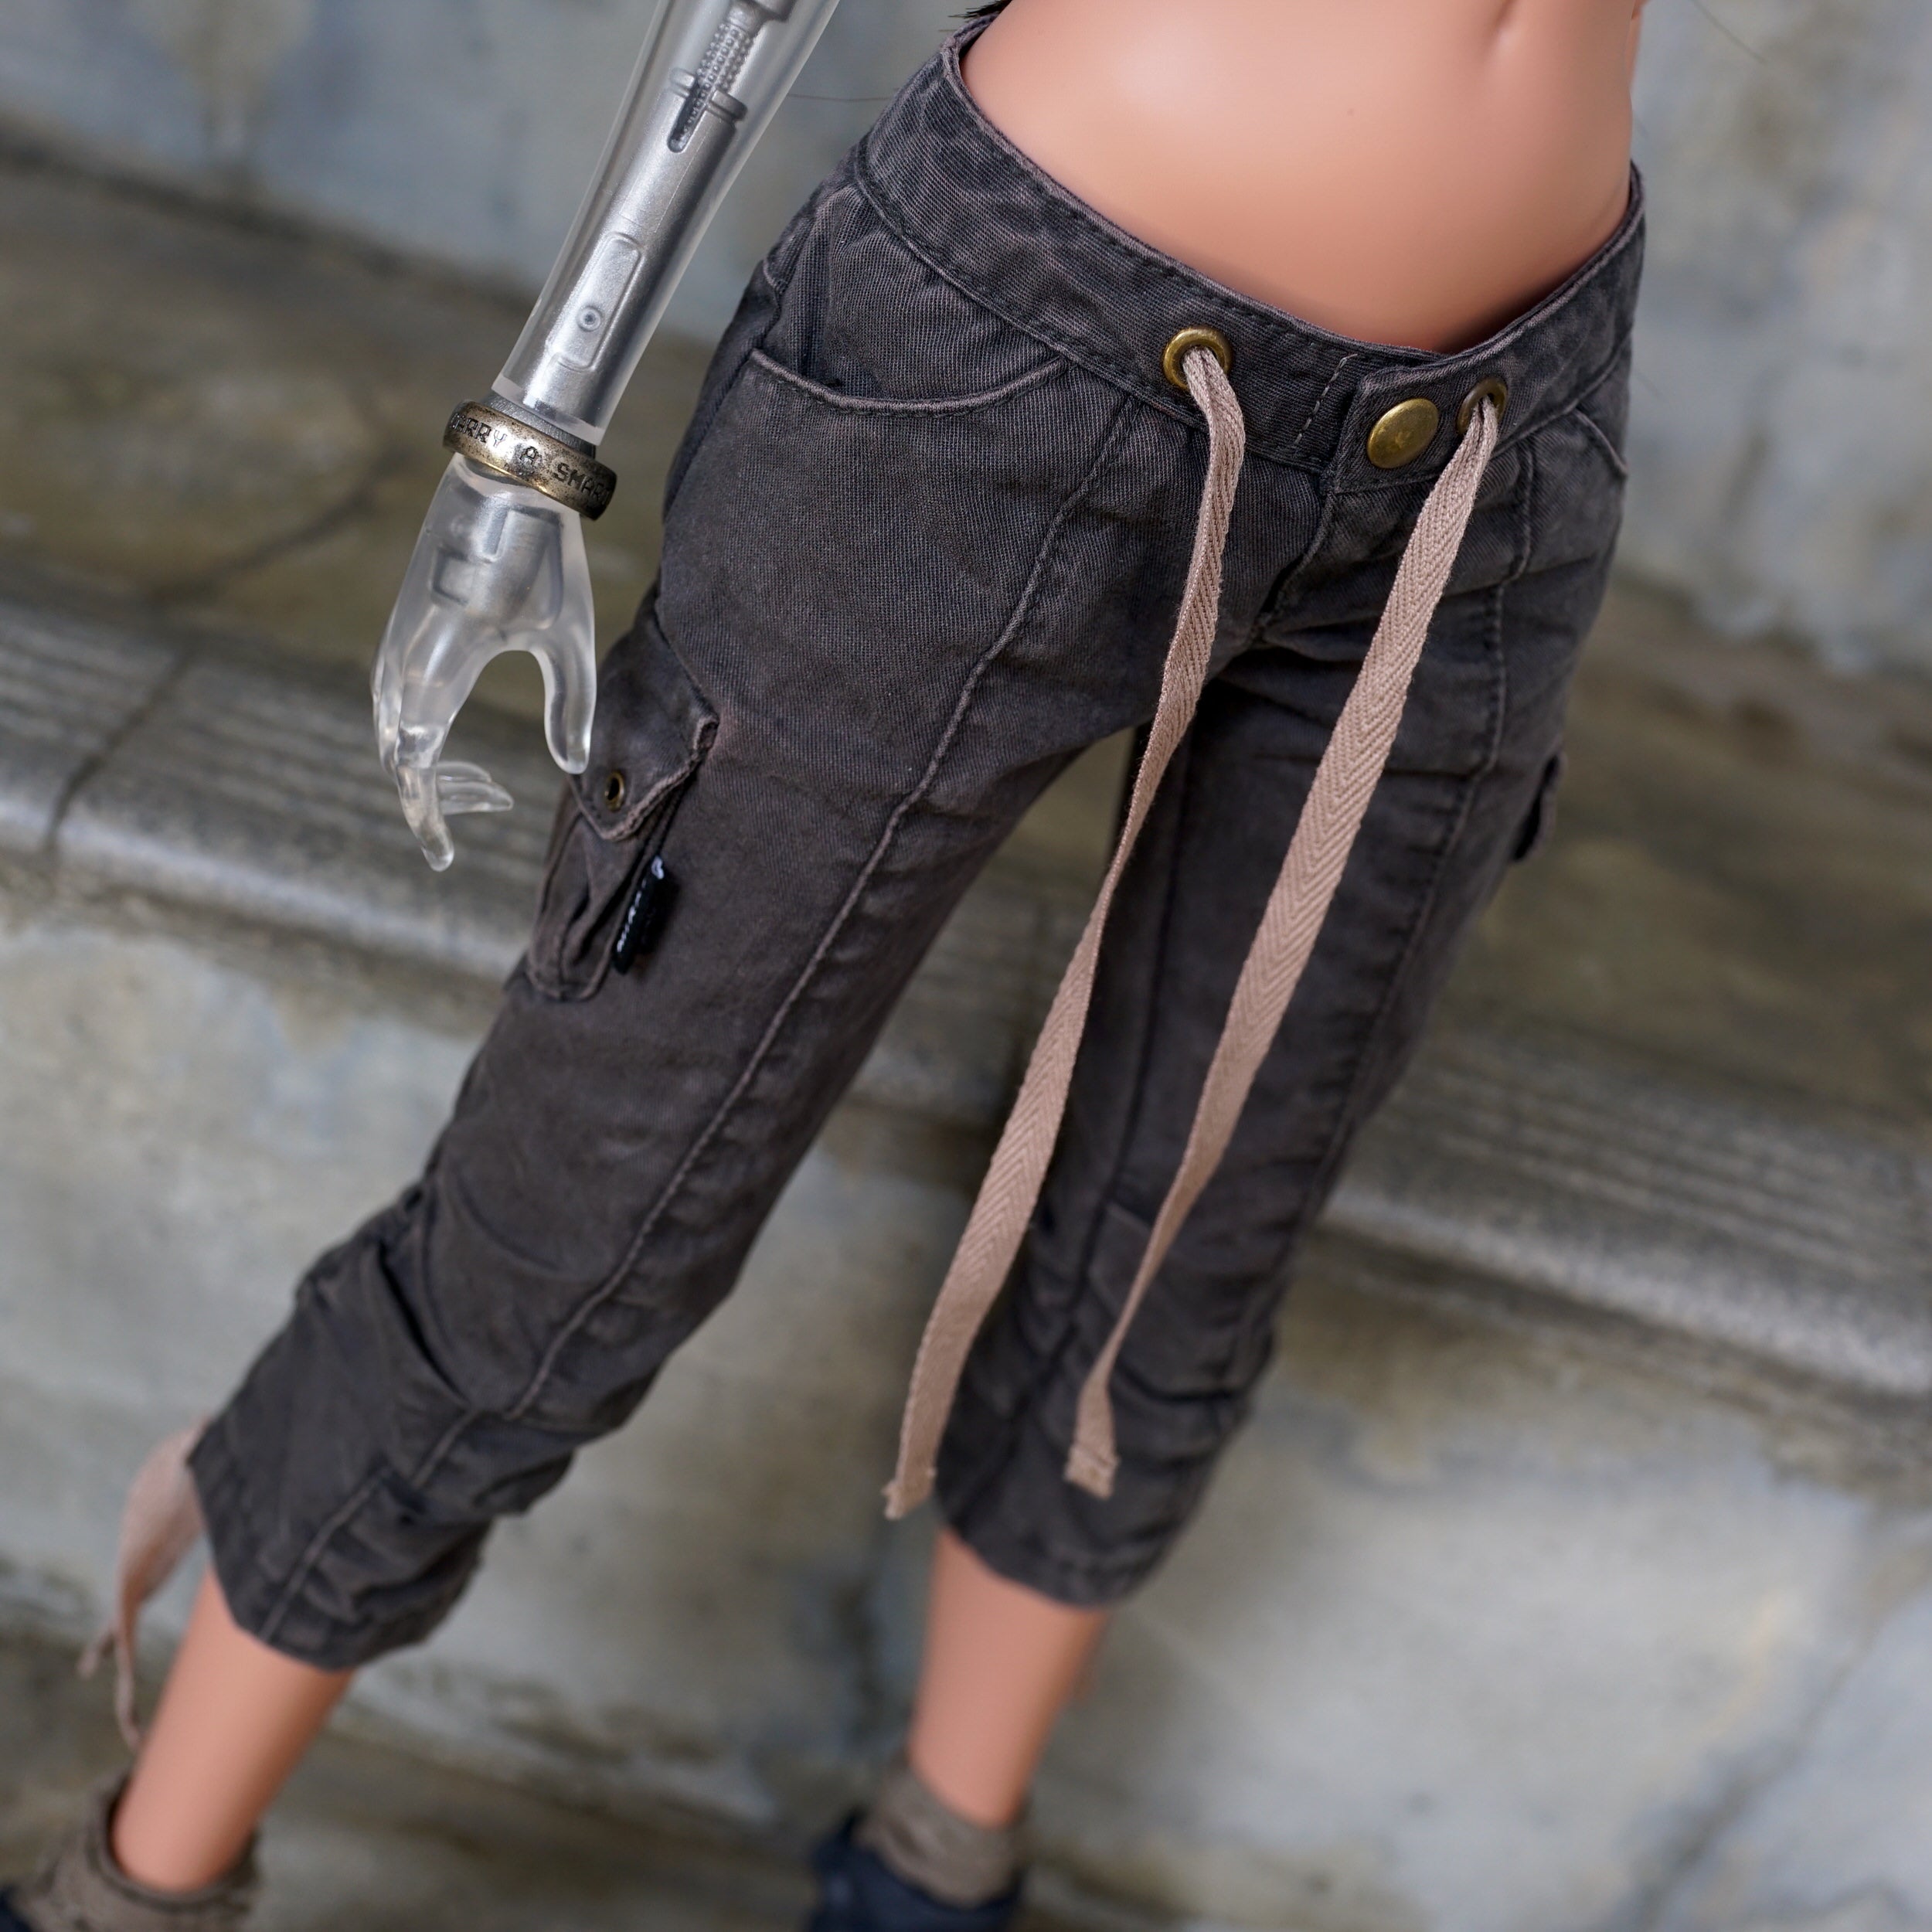 Cargo Capri Pants (Ash Blue) [Mirai Inc. - Smart Doll] - $89.00 : Fabric  Friends Doll Shop - Ball Jointed Dolls, Plush Gifts and Collectibles in  Maryland